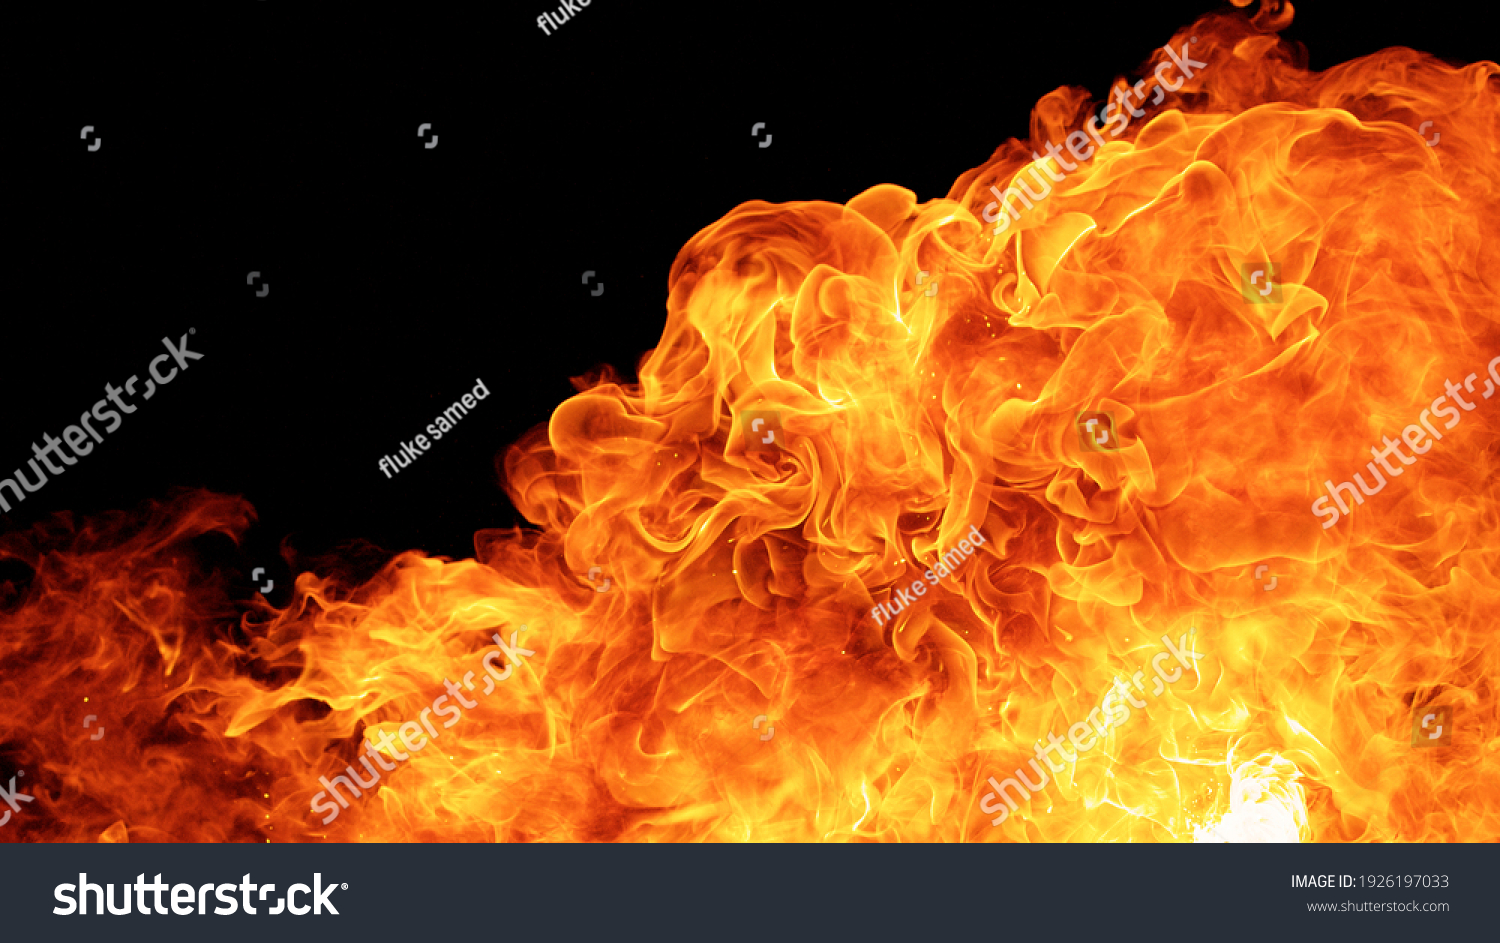 blaze fire flame conflagration texture background in full hd aspect ratio #1926197033